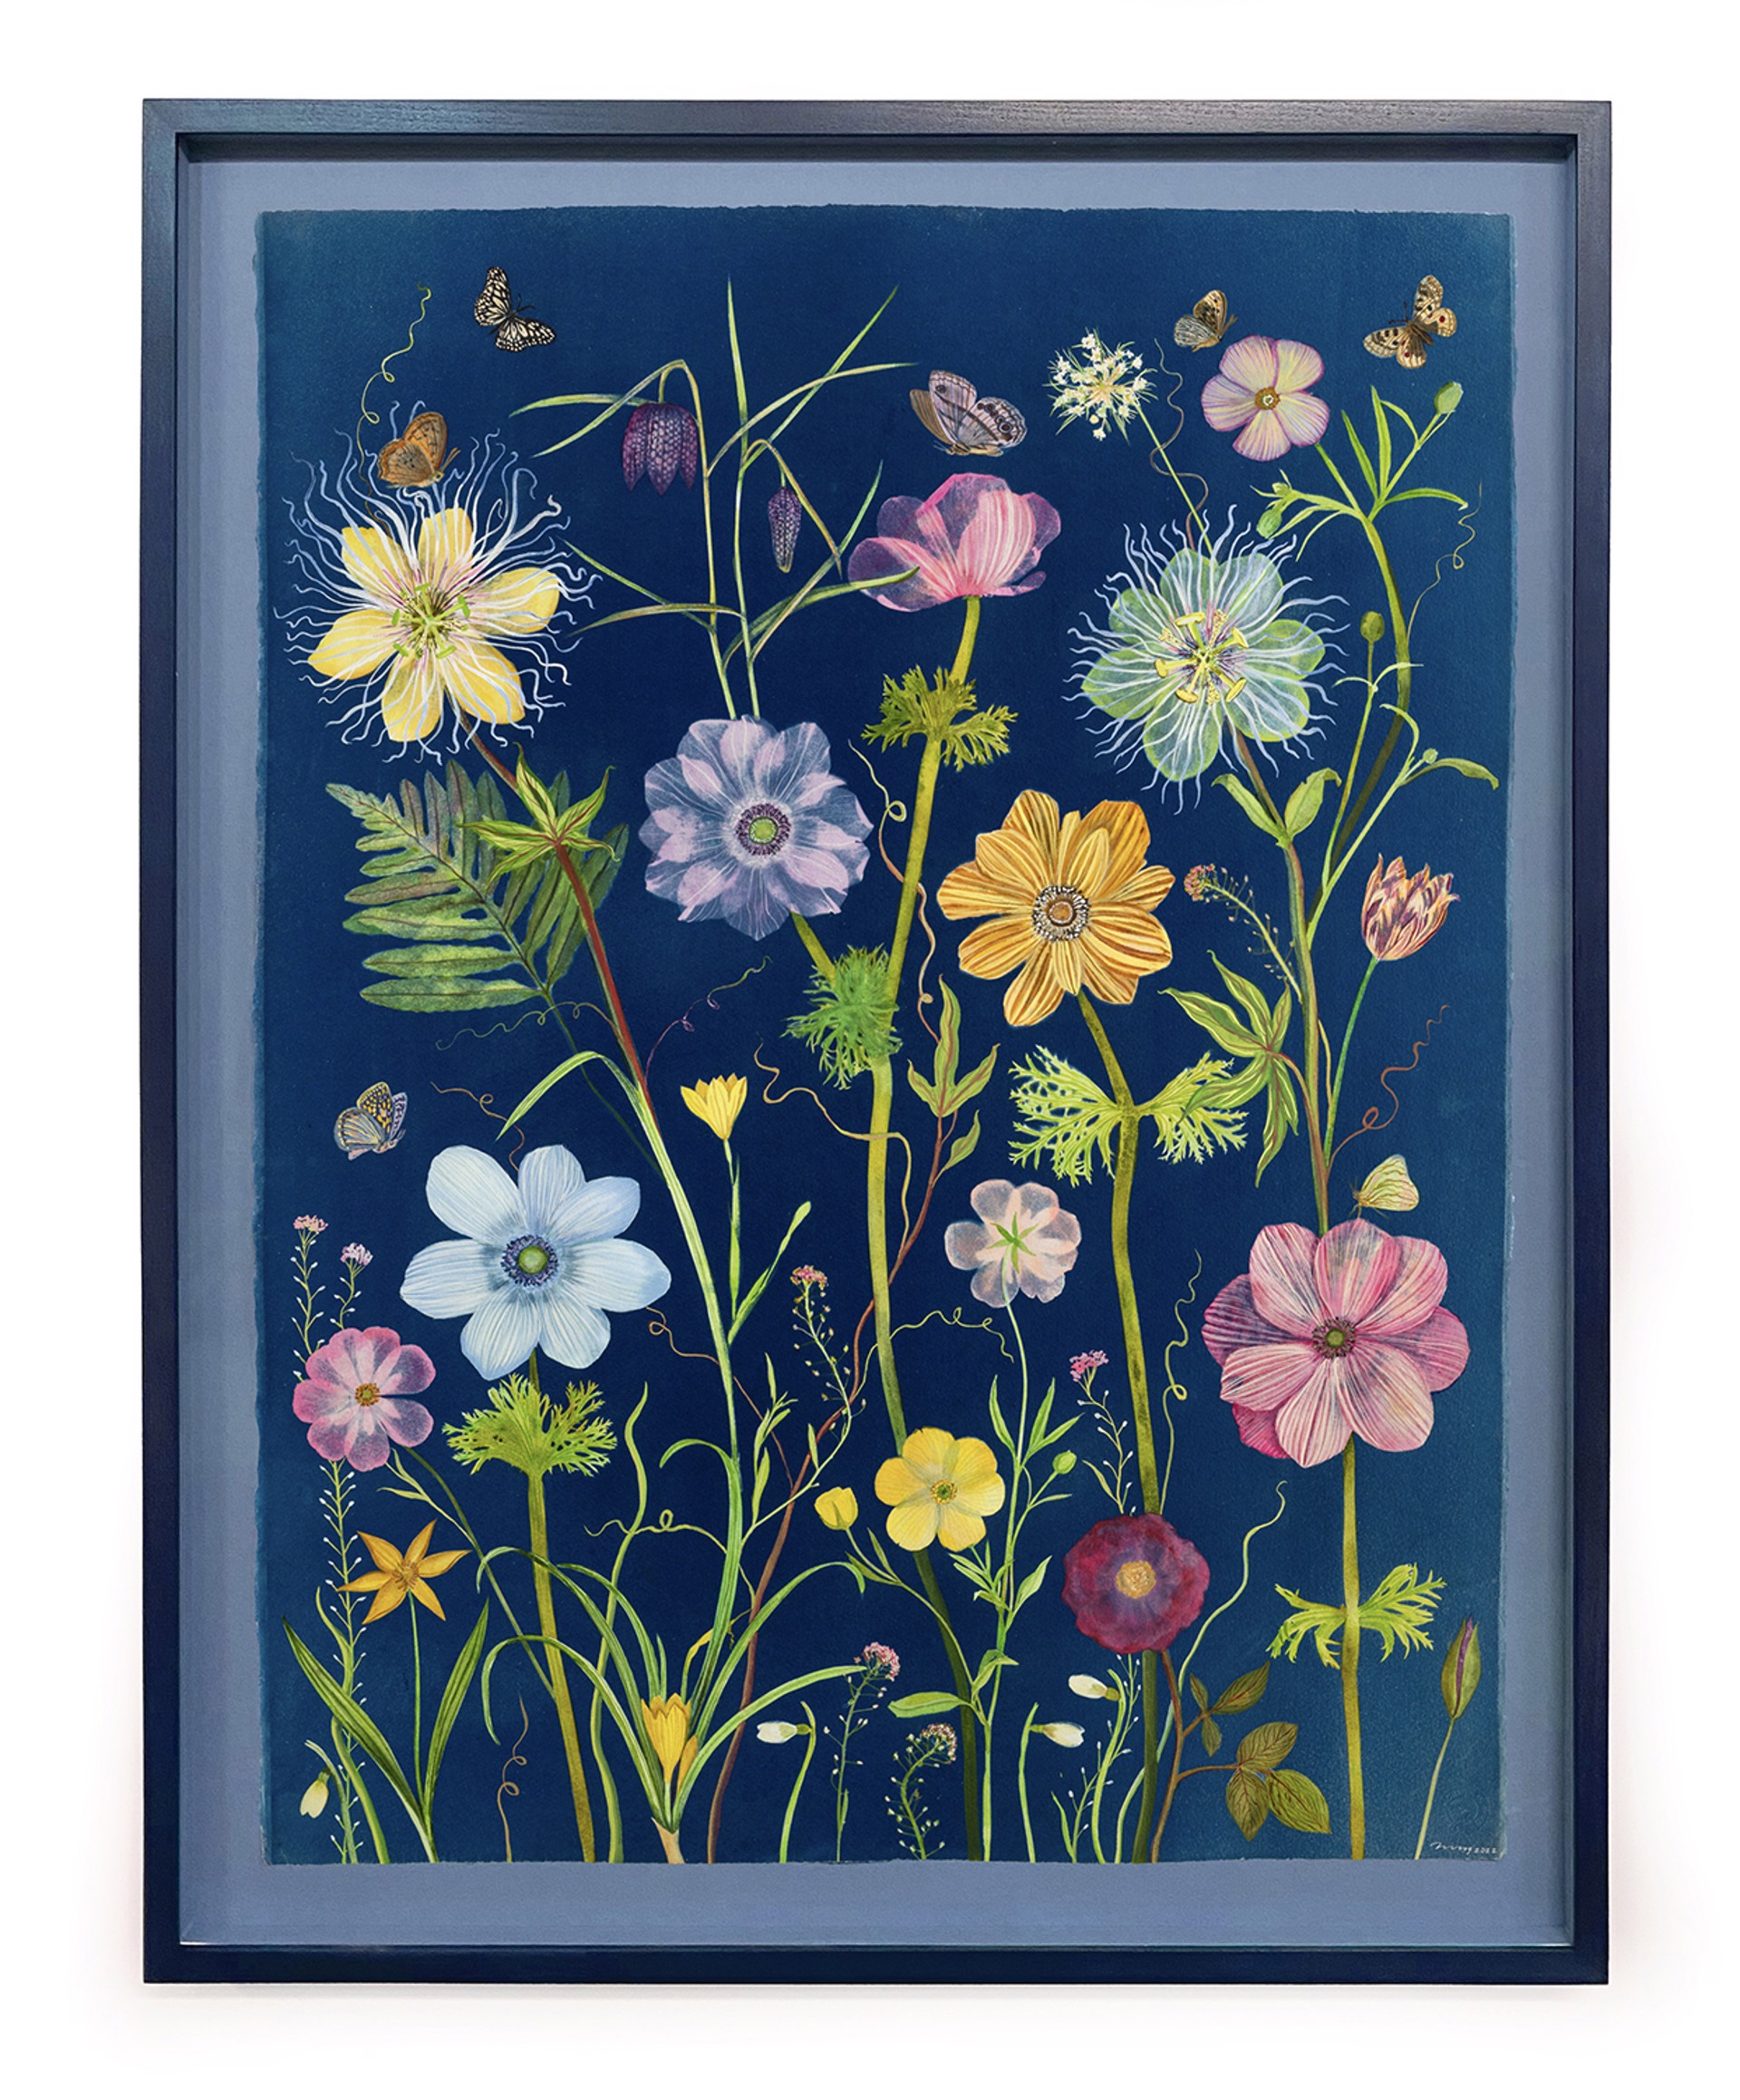 Nocturnal Nature (Anemone, Passionflower, Buttercup, Ferns, Pollinators, etc.) by Julia Whitney Barnes